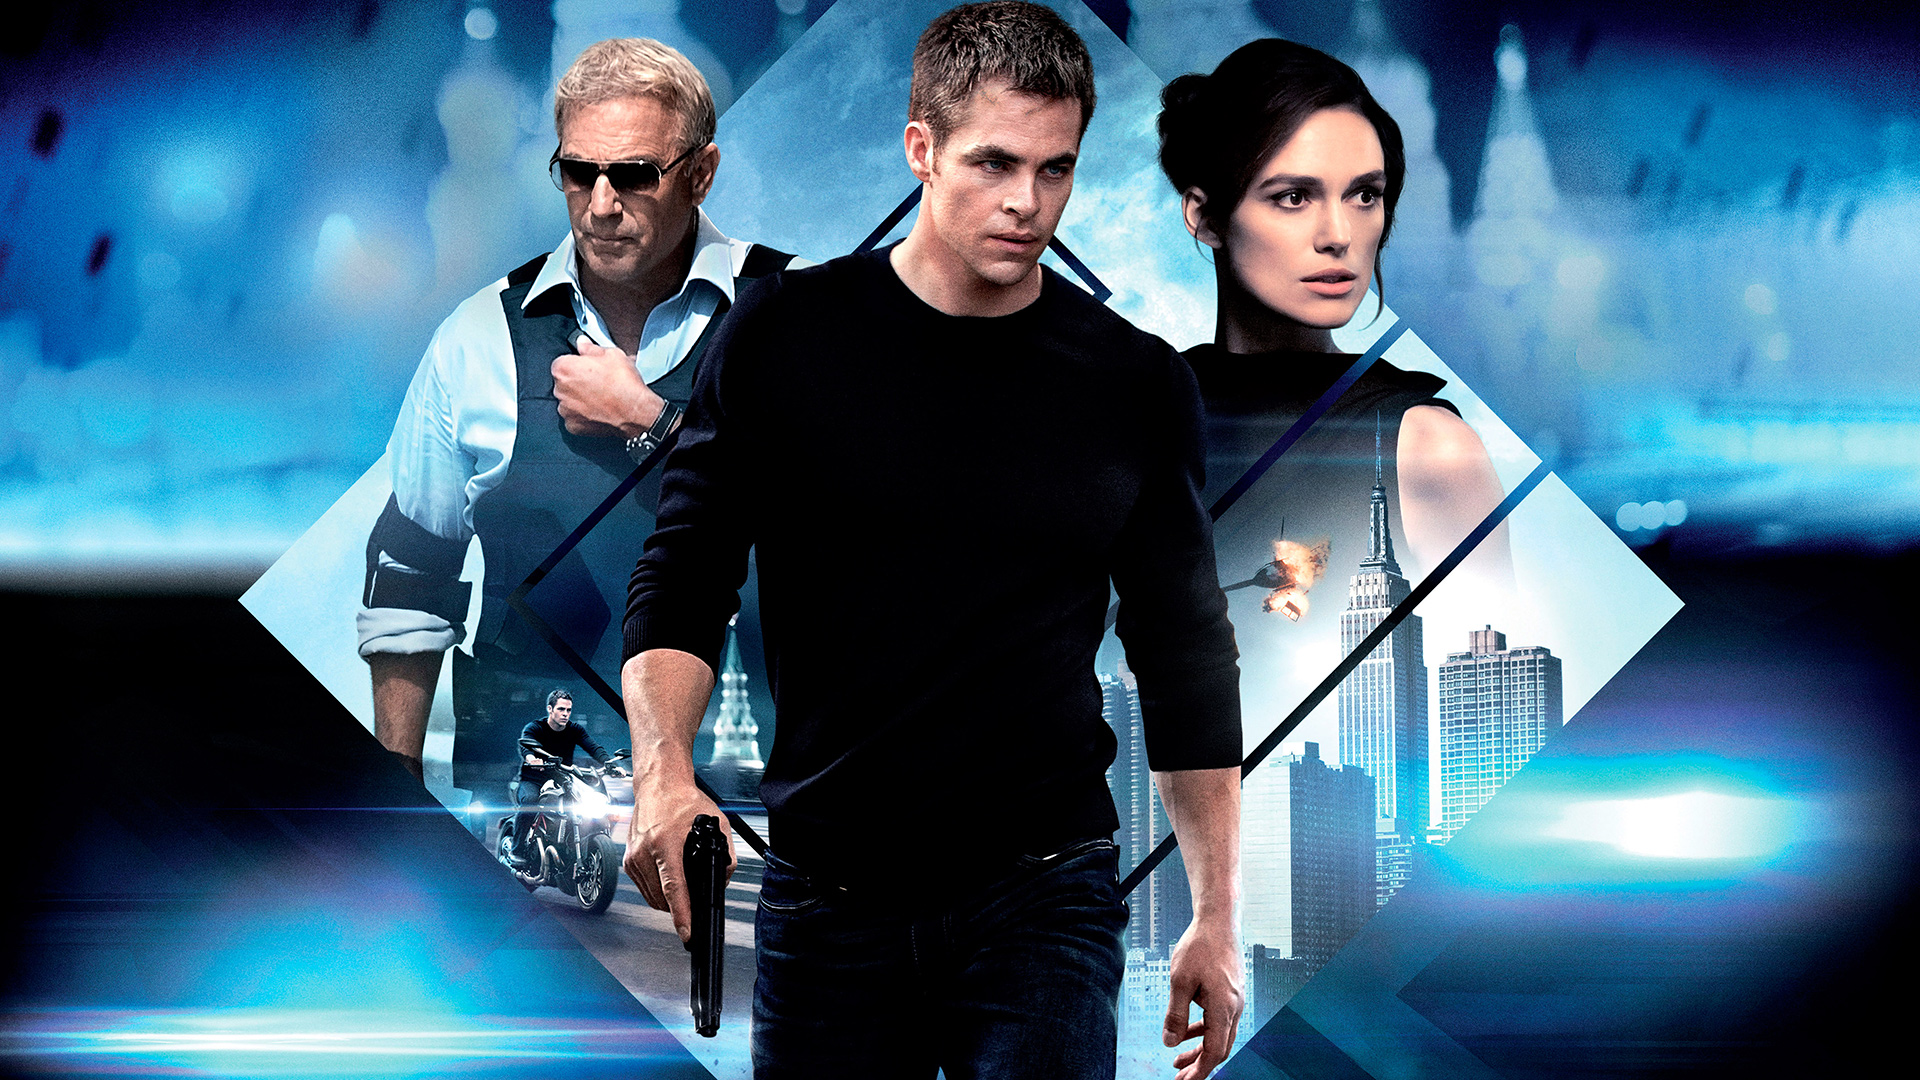 Review: Jack Ryan Shadow Recruit (4K) - The Based Update